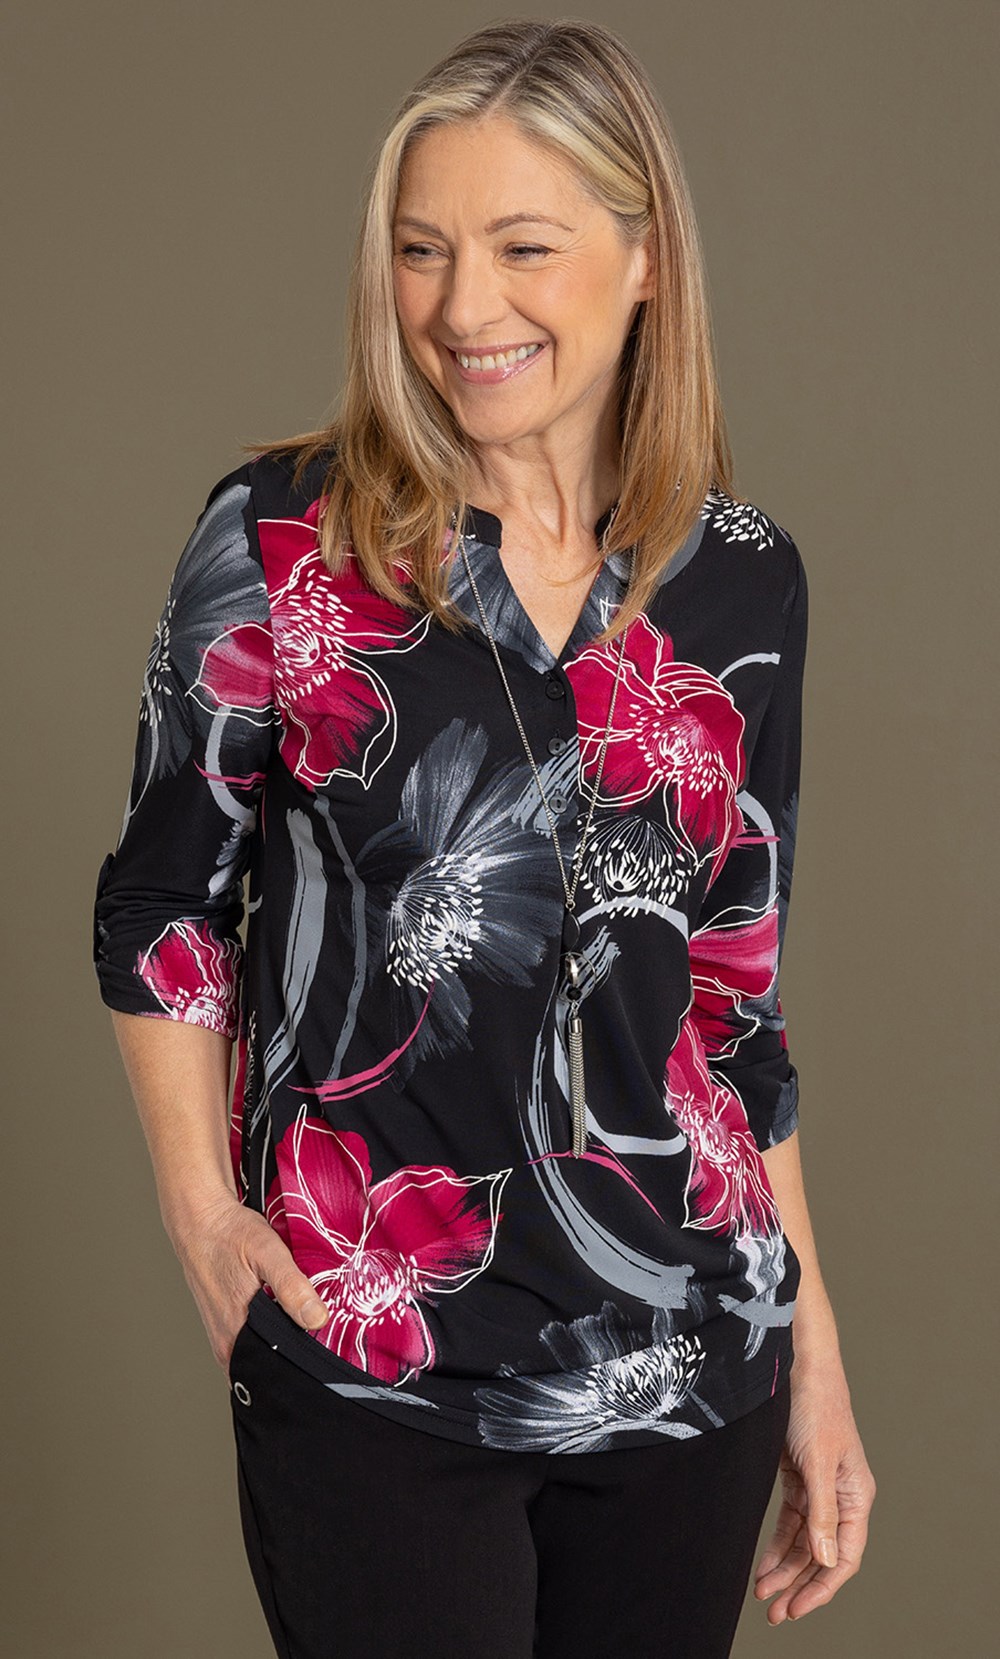 Brands - Anna Rose Anna Rose Textured Floral Print Top With Necklace Black/Pink Multi Women’s